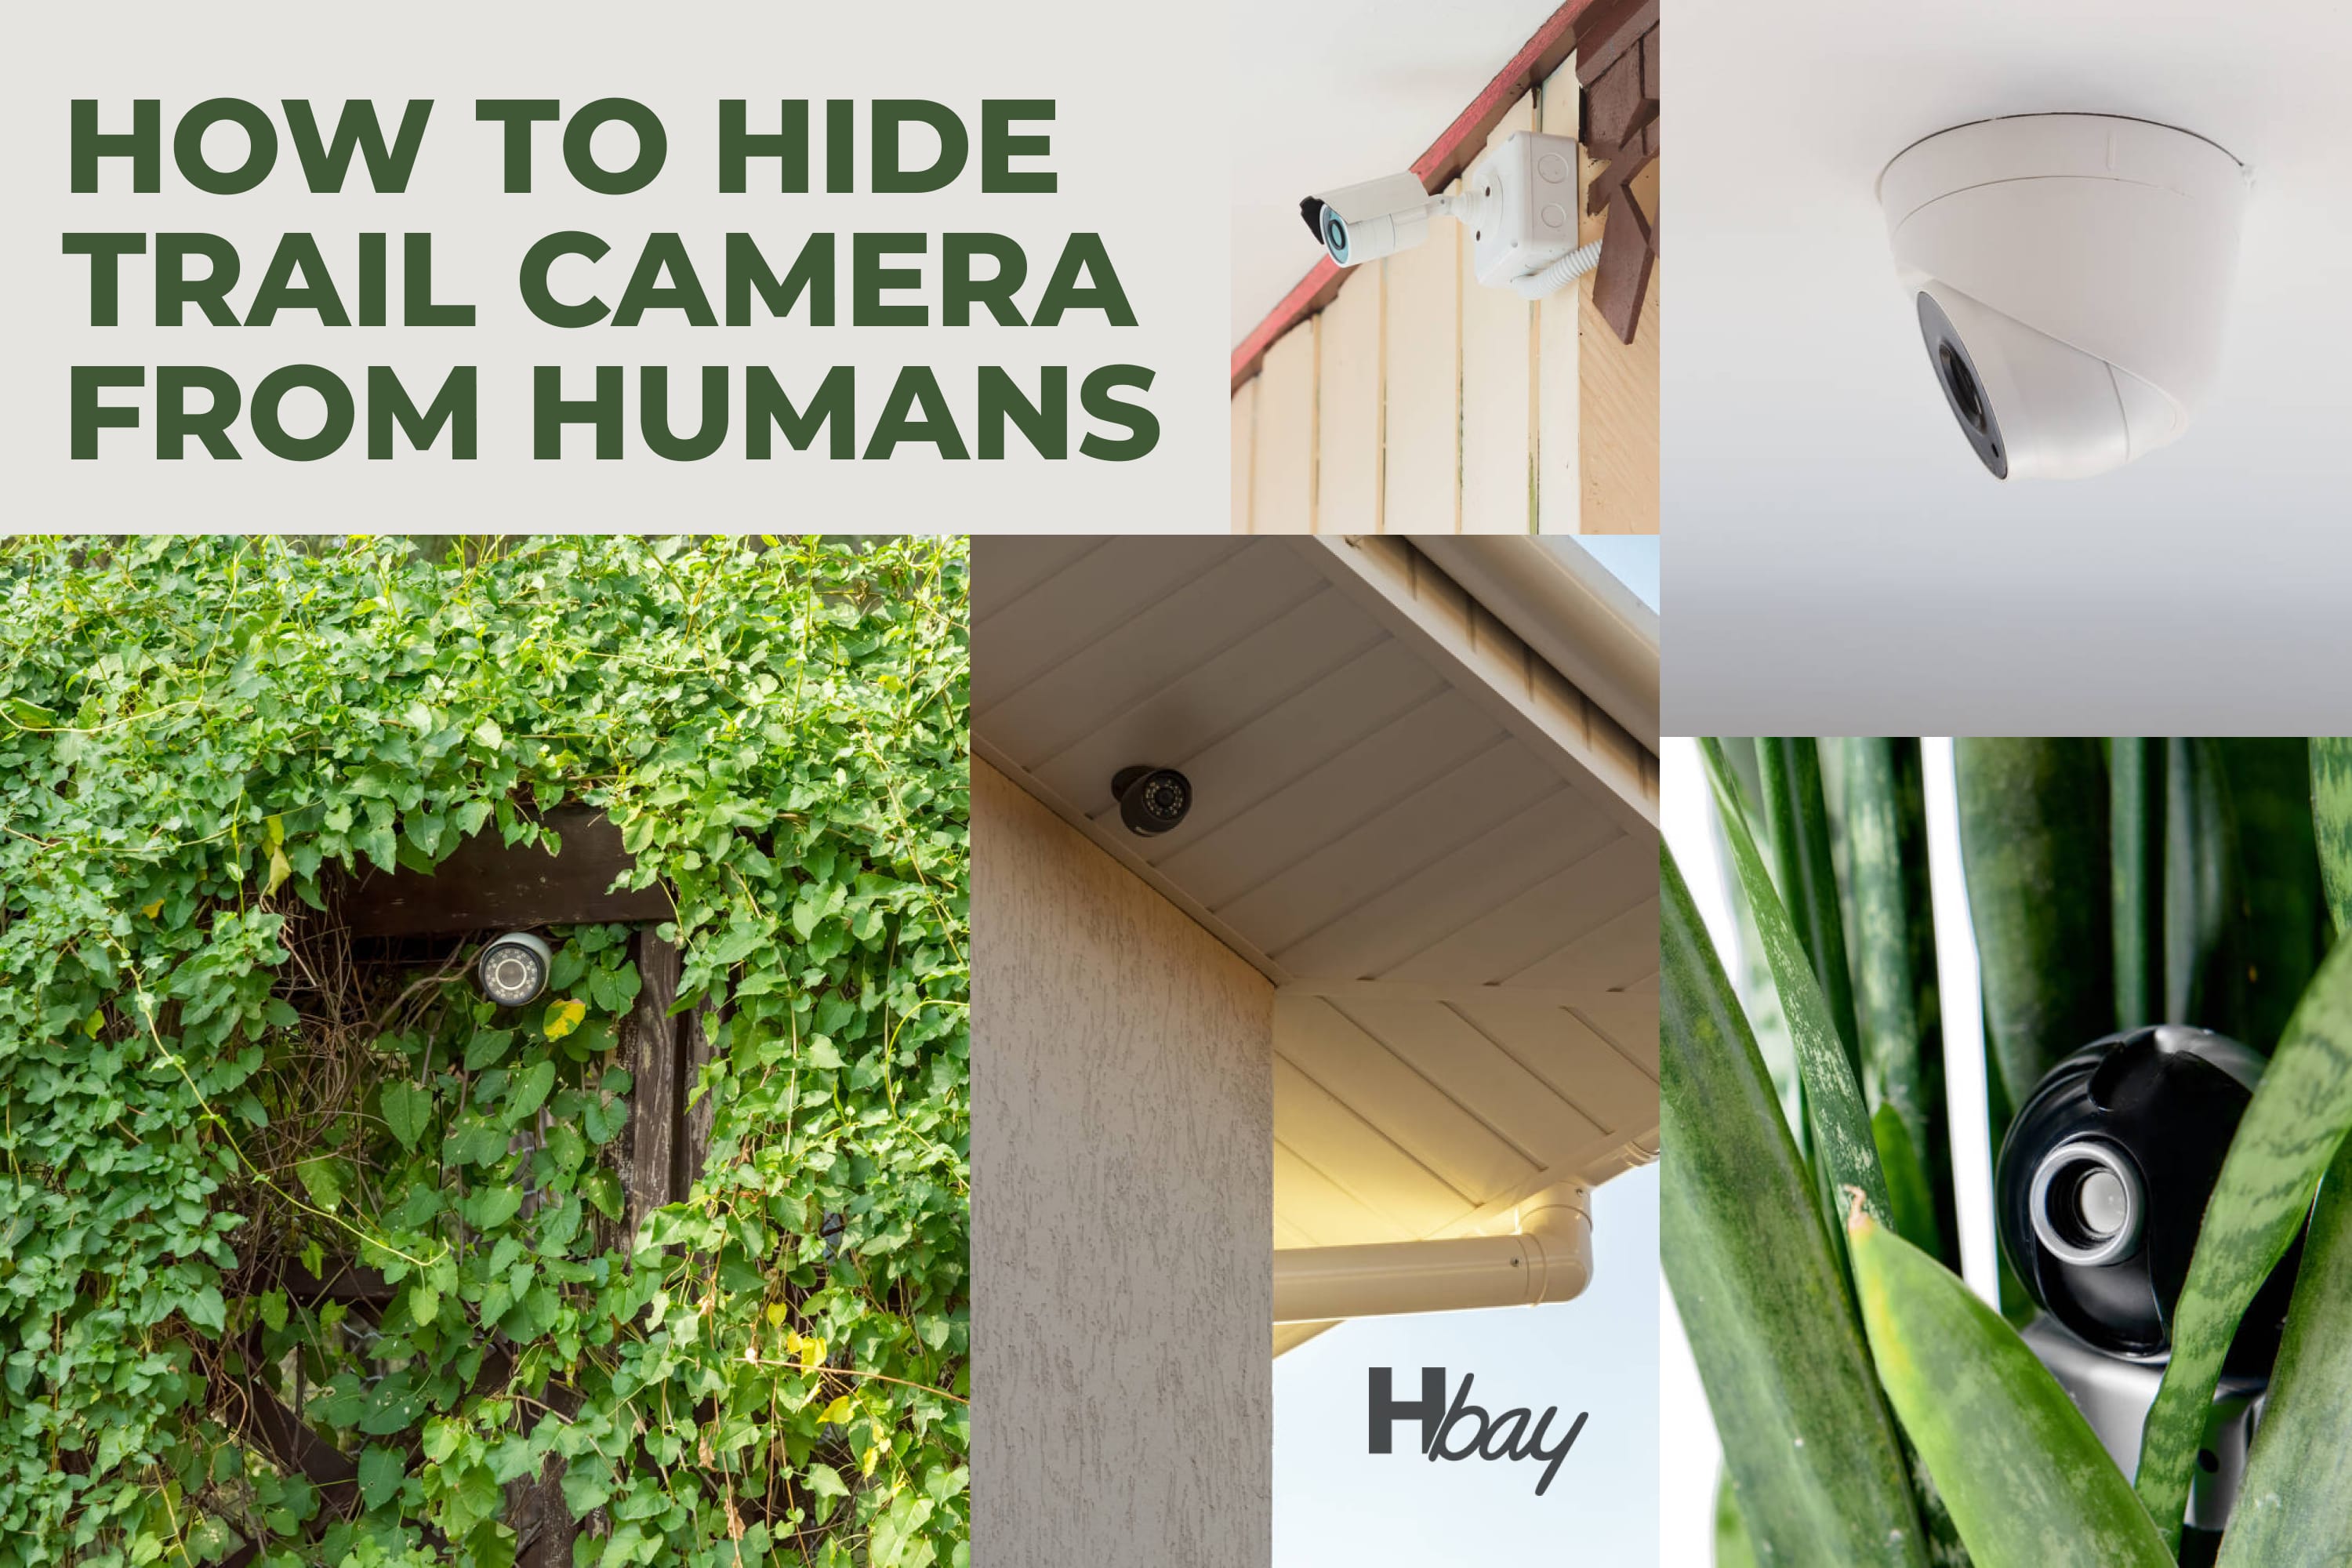 How to Hide Trail Camera From Humans